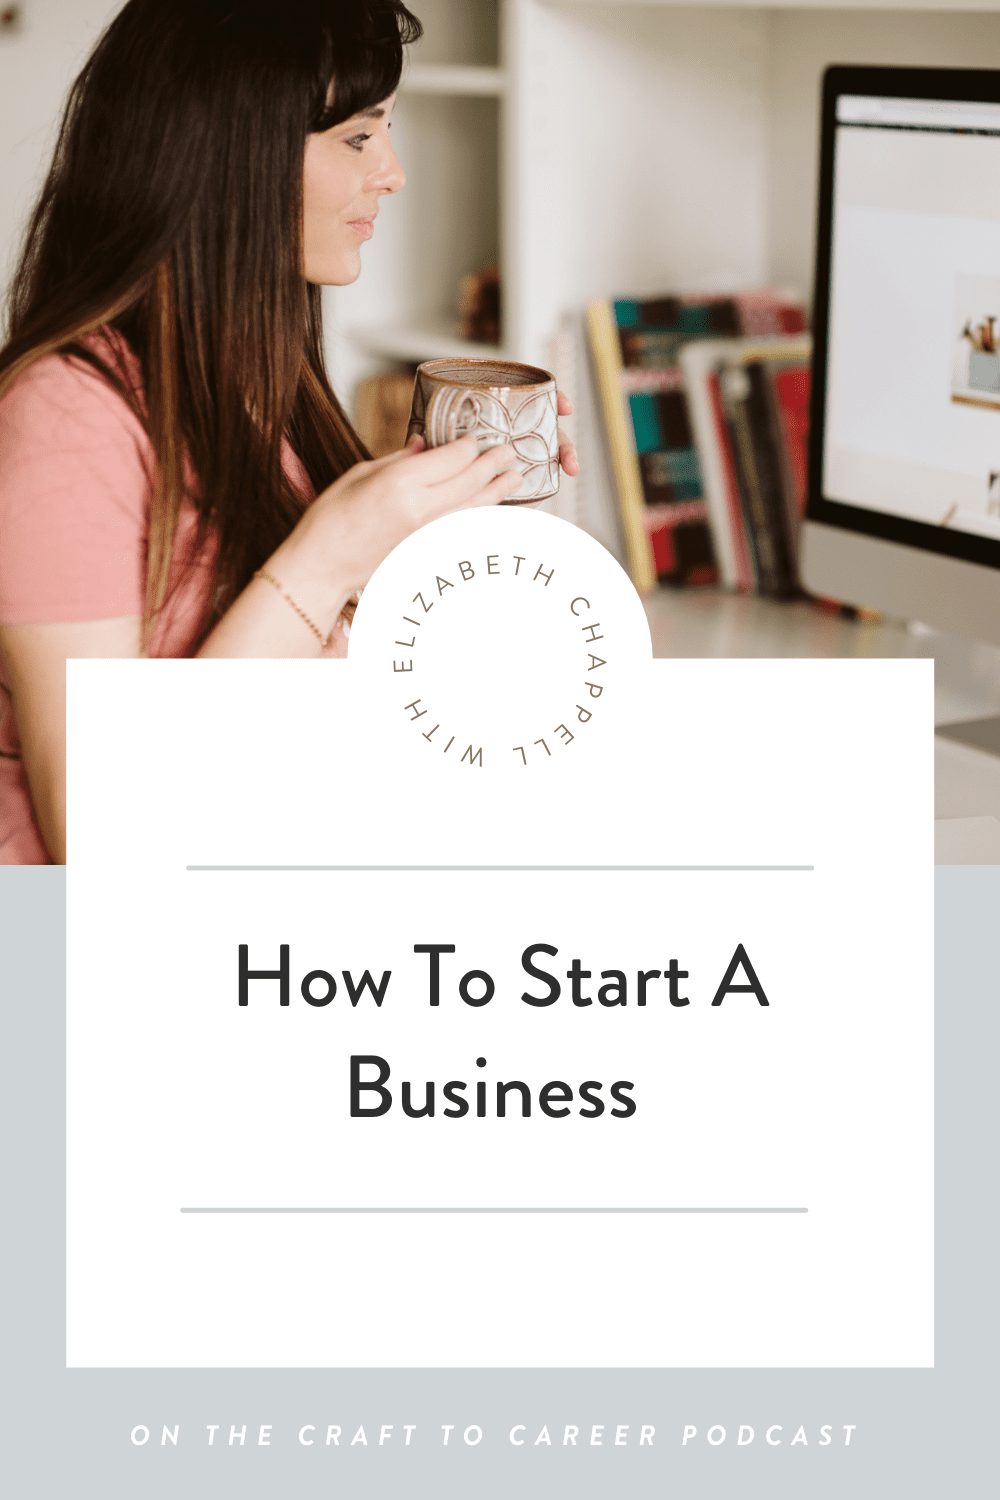 How To Start A Business Craft to Career Podcast